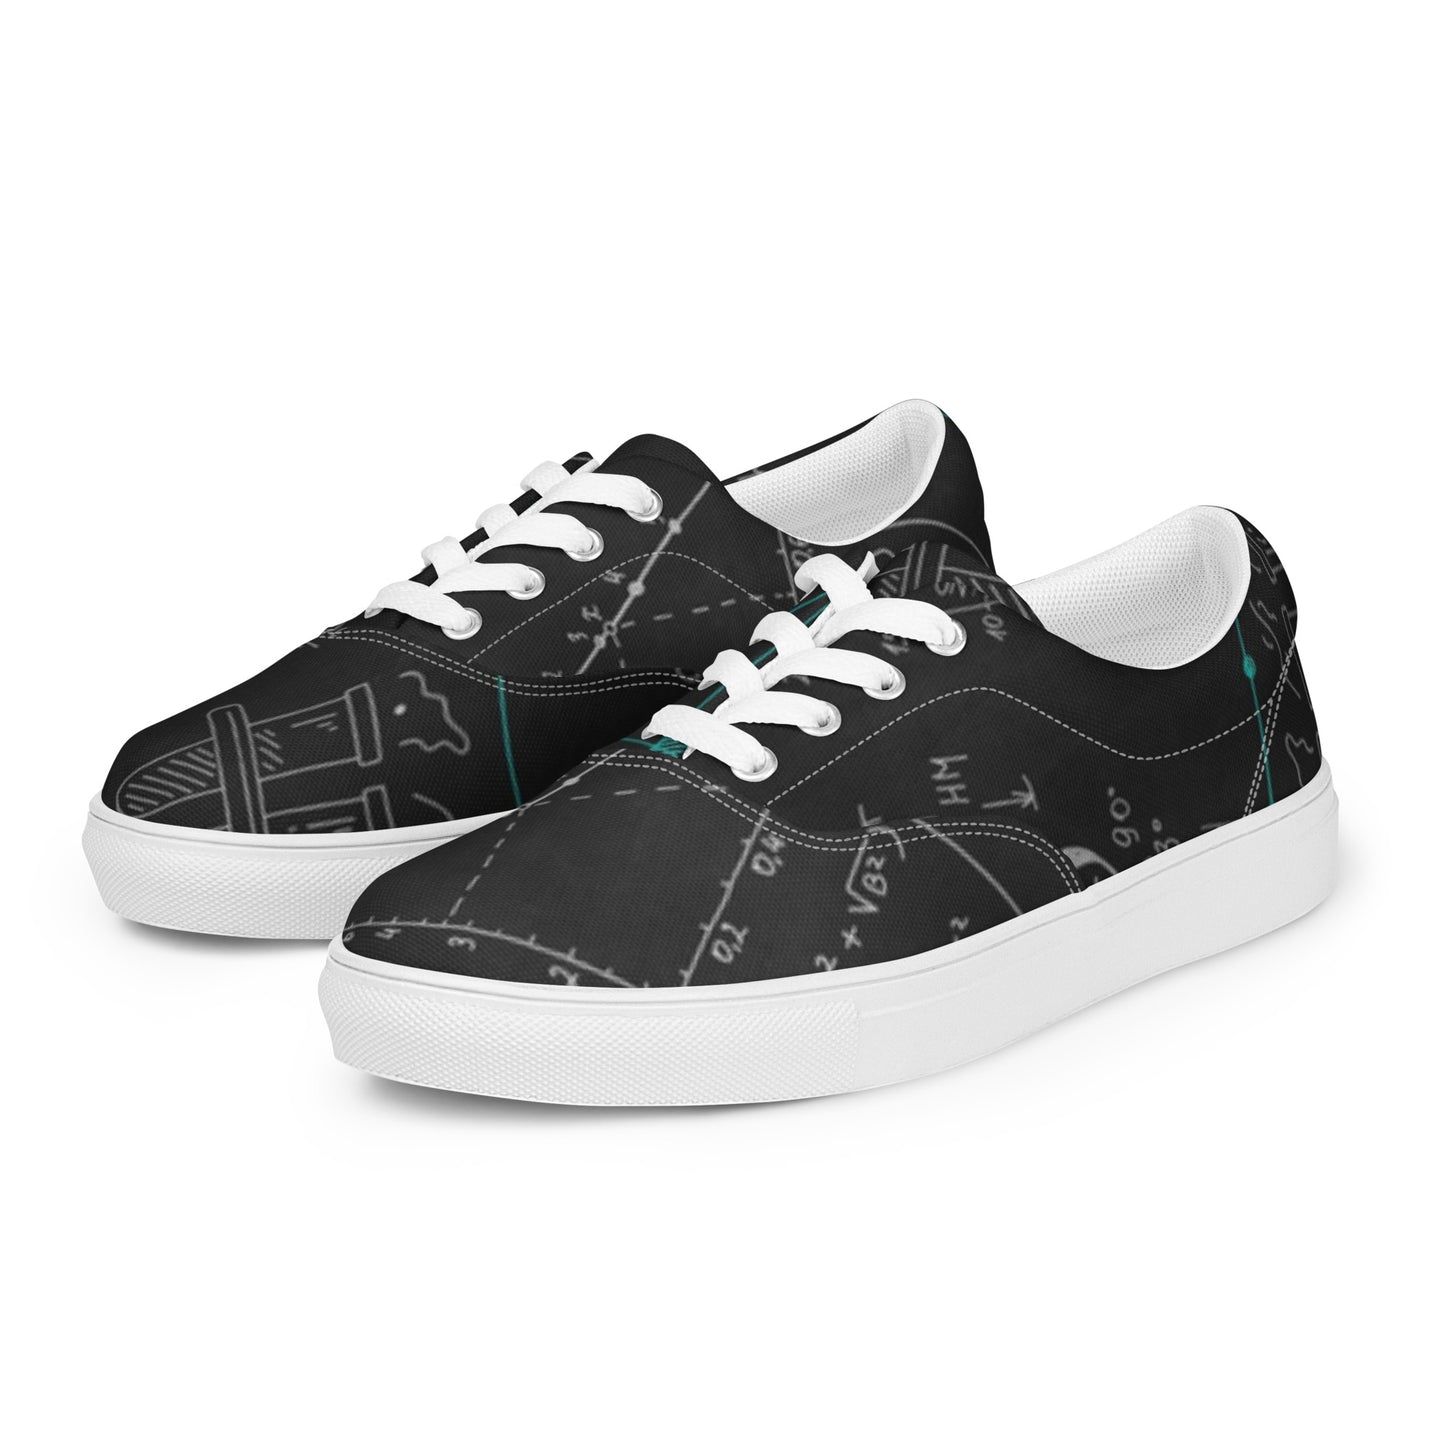 Science Rules | Women’s Lace-Up Canvas Shoes